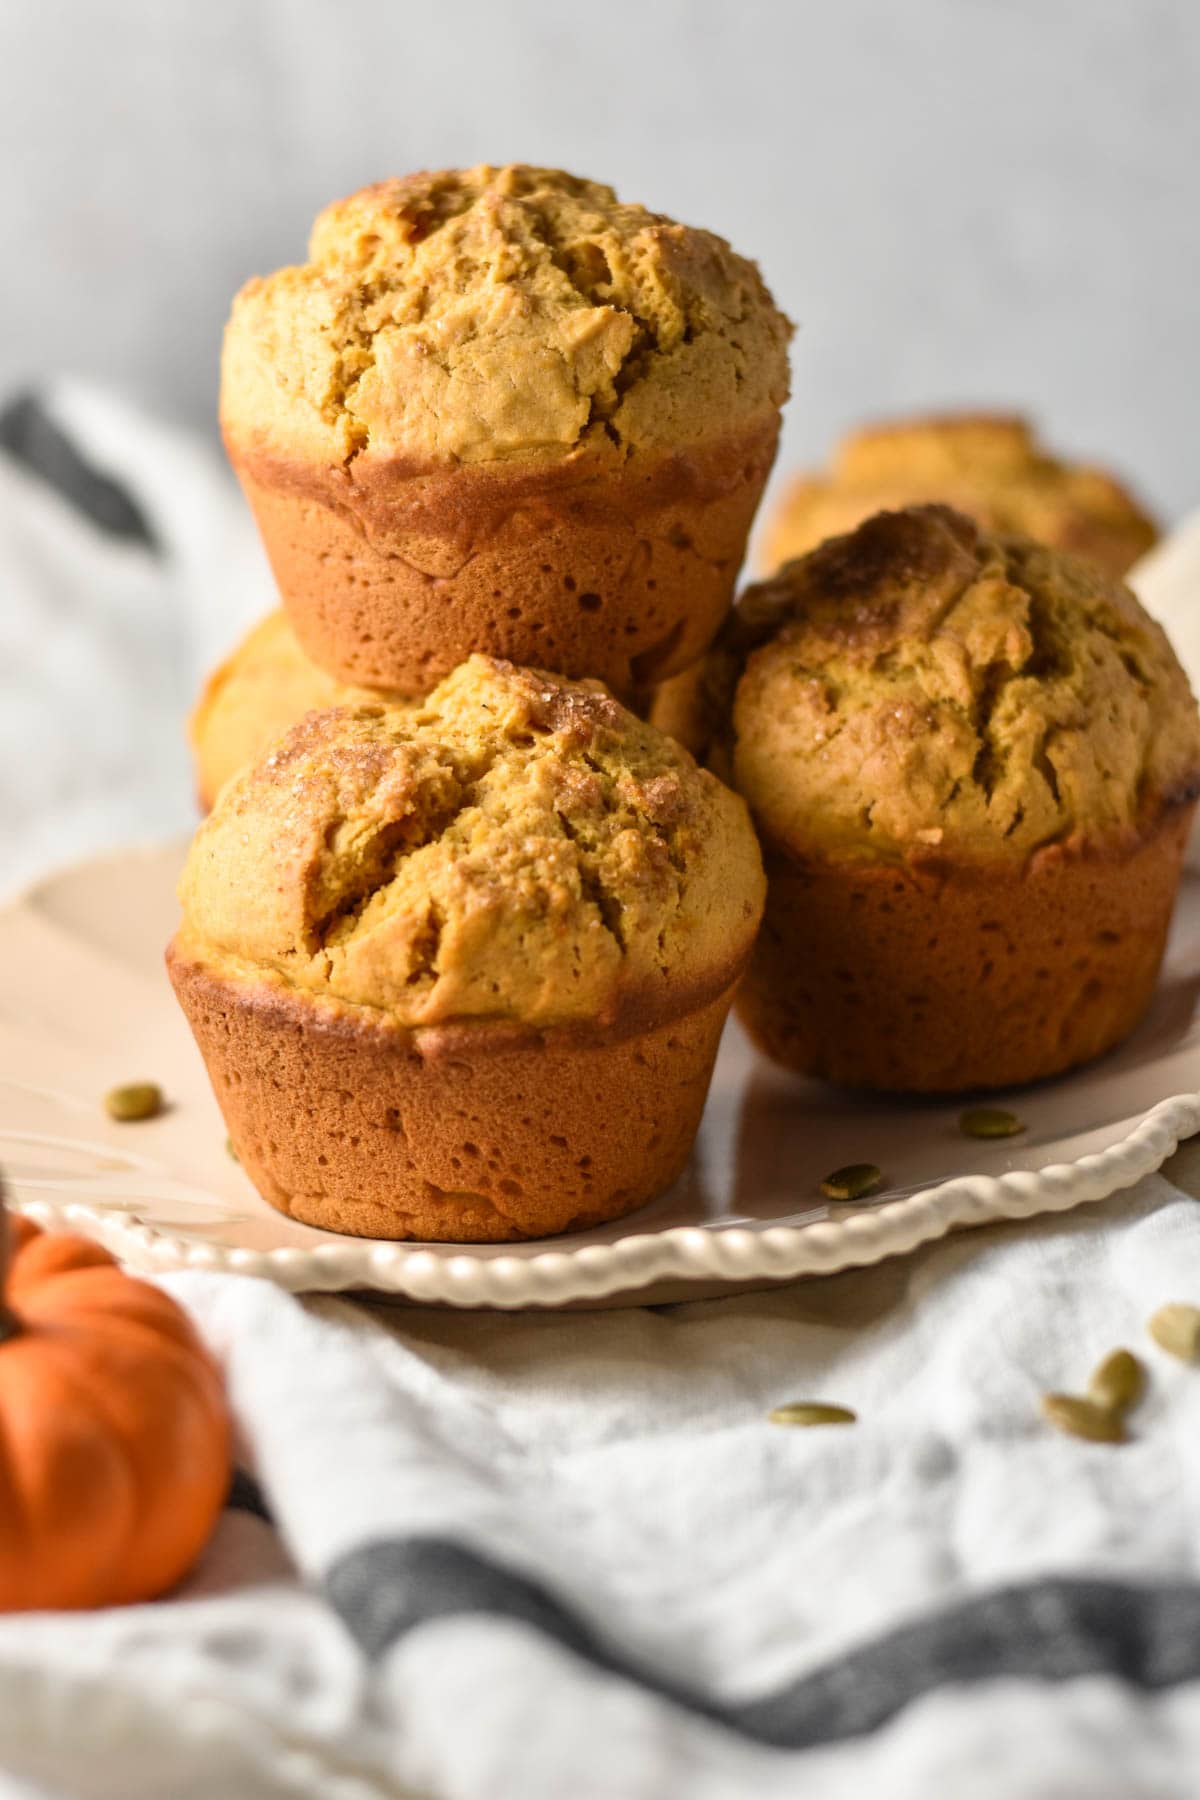 Bakery style pumpkin muffins on a plate with pumpkins.